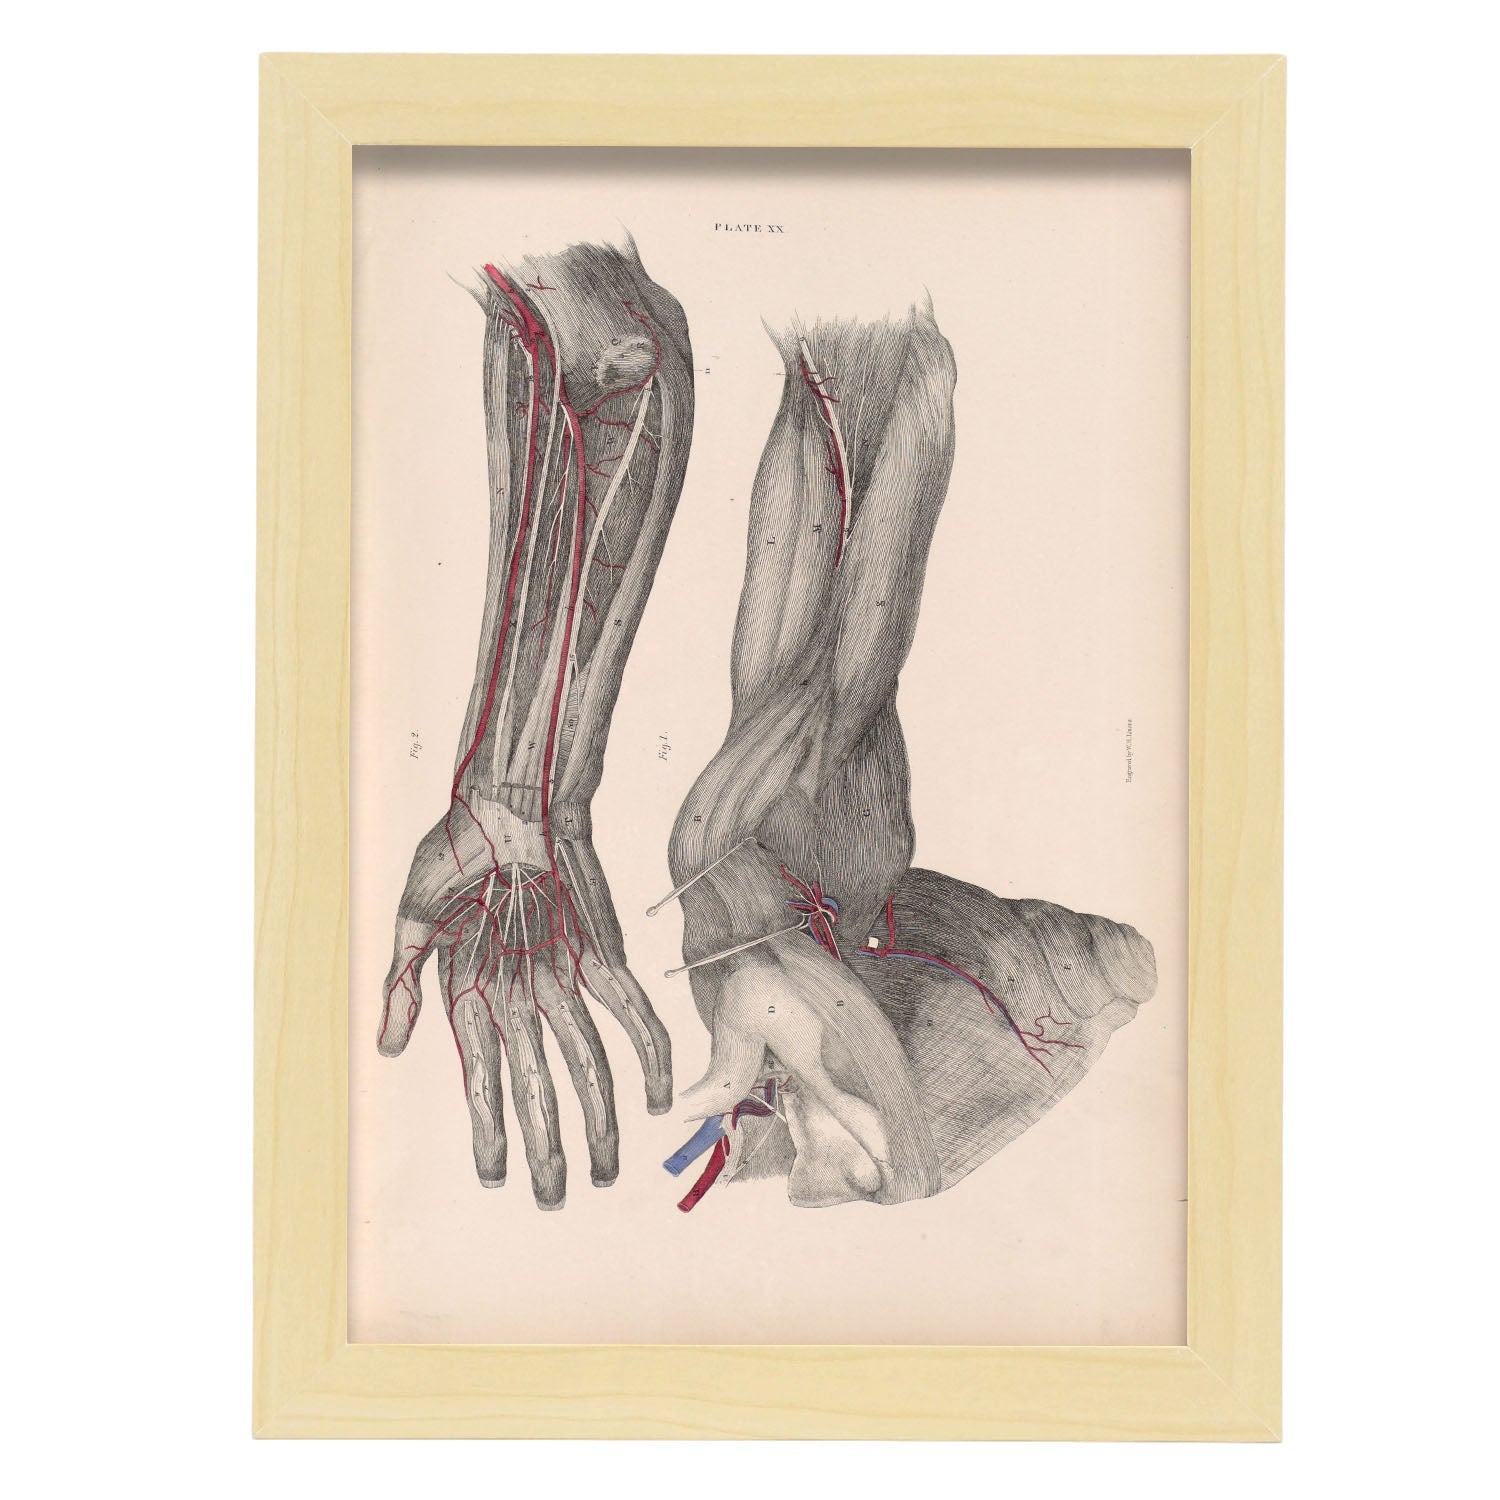 Dissection of the arm and hand-Artwork-Nacnic-A4-Marco Madera clara-Nacnic Estudio SL